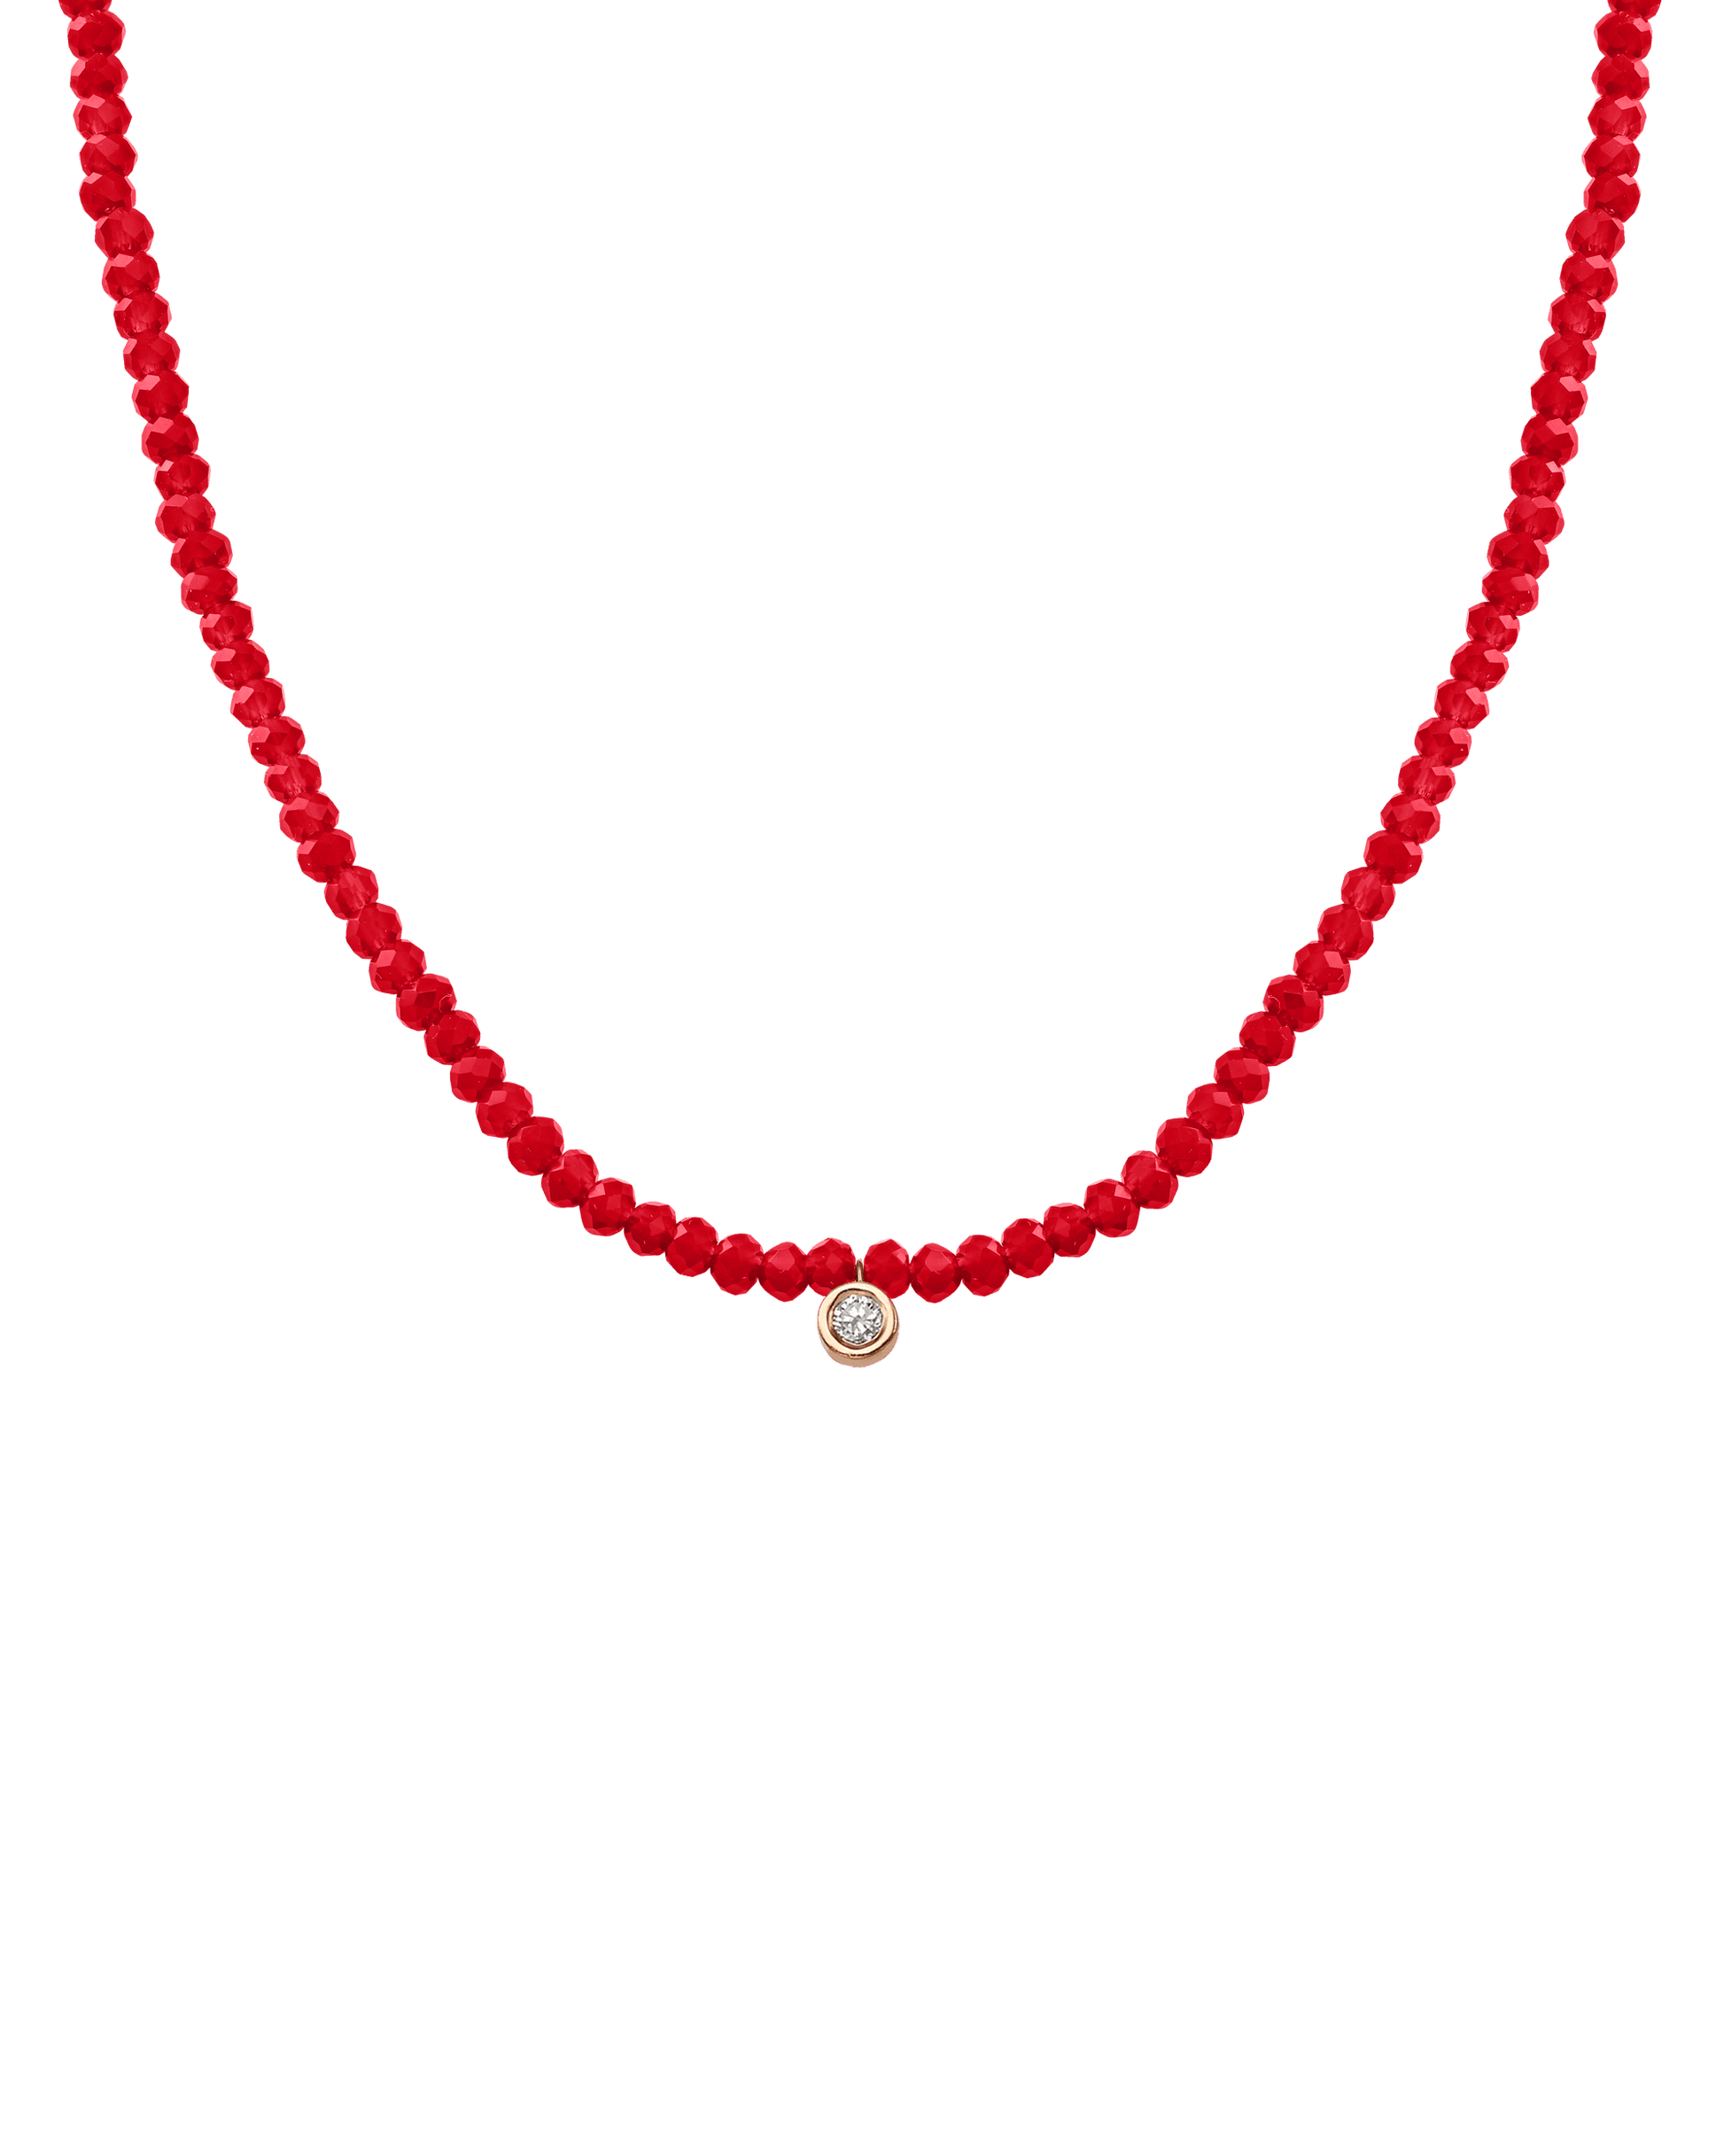 The Gemstone & Diamond Necklace - 14K Rose Gold Necklaces 14K Solid Gold Natural Red Jade Medium: 0.04ct 14"